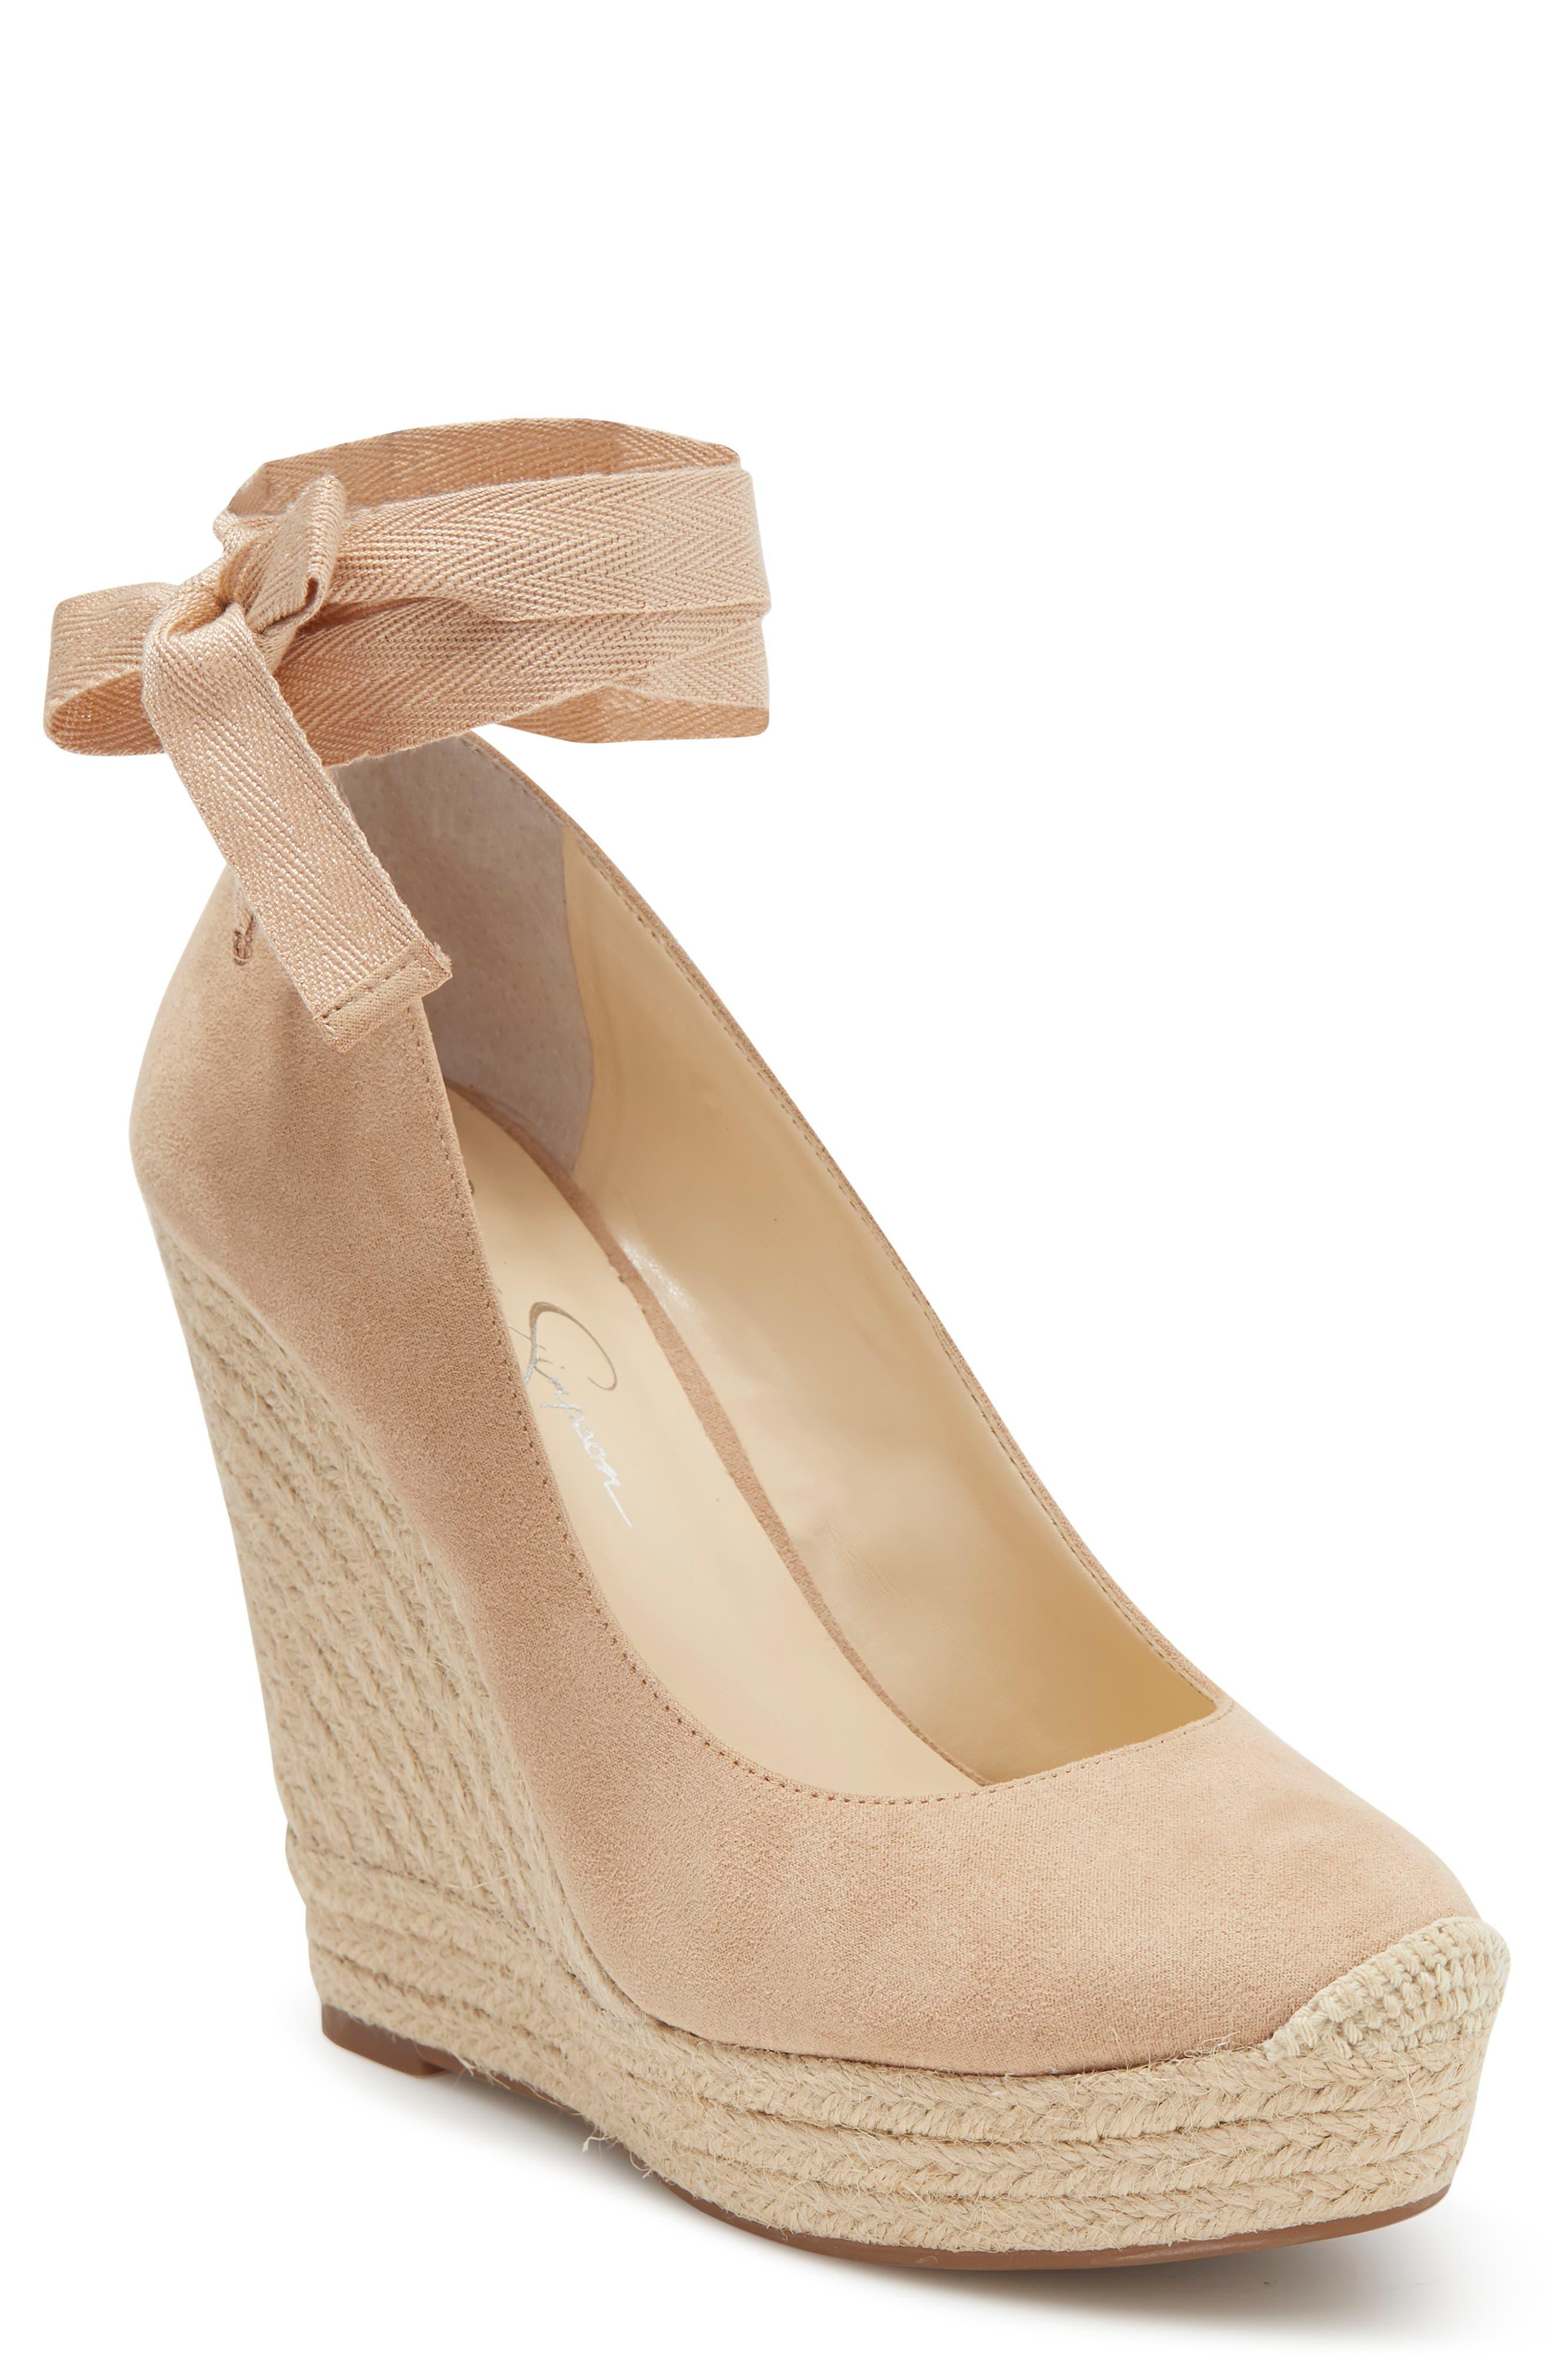 Jessica Simpson Zexie Ankle Tie Espadrille Wedge In Almond 4 At Nordstrom  Rack in Natural | Lyst